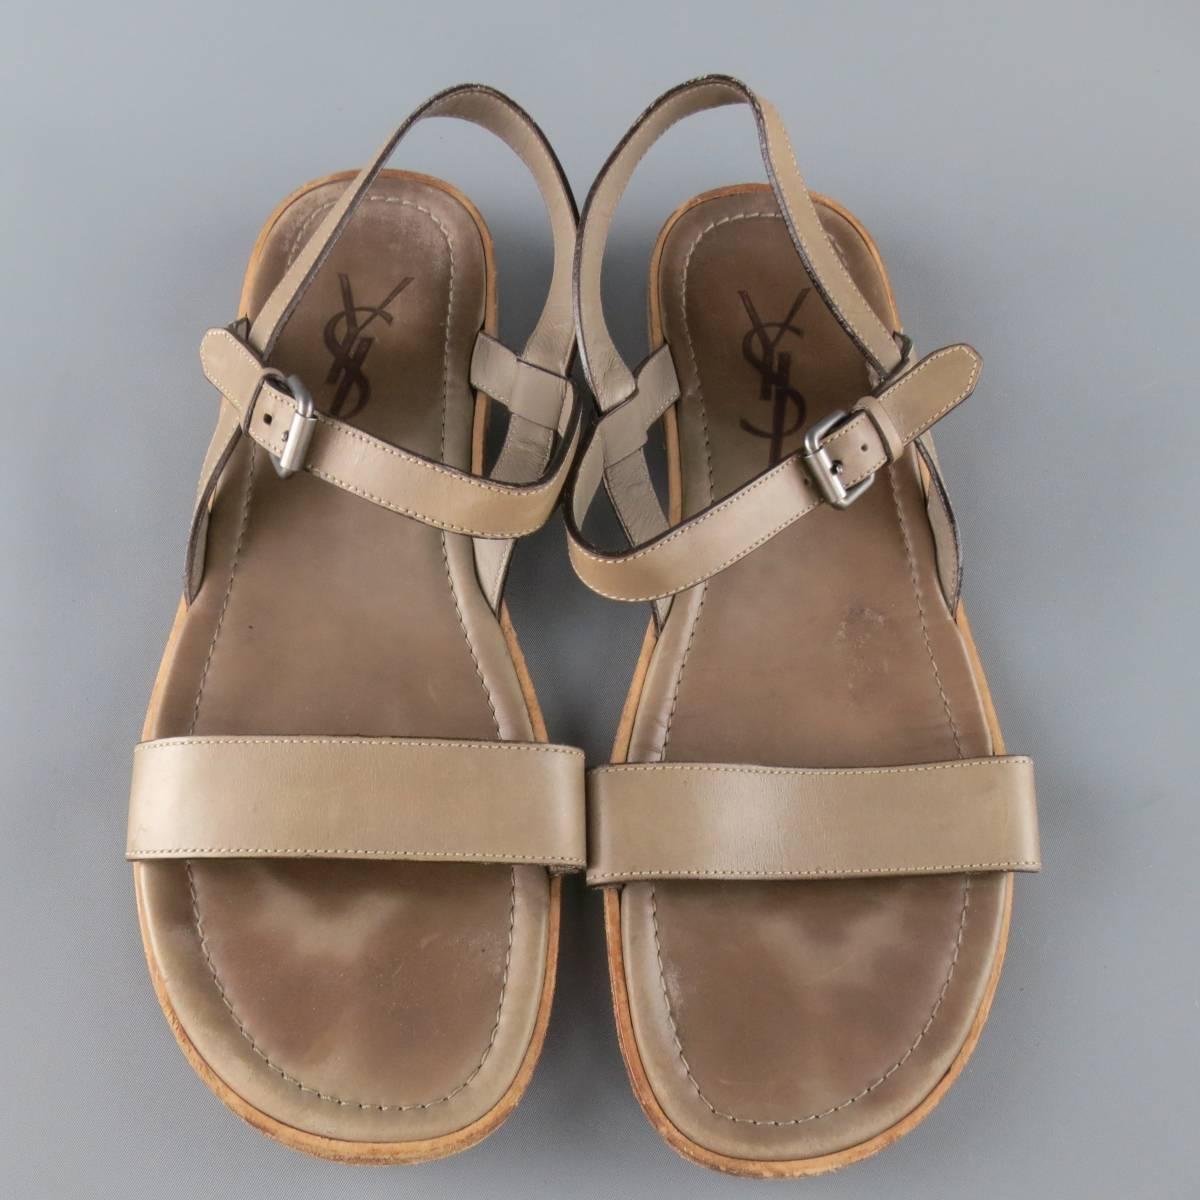 YVES SAINT LAURENT sandals feature light taupe gray leather toe strap and ankle harness with a logo leather insole and stacked sole. Resoled. Wear throughout. As-Is. Made in Italy.
 
Fair Pre-Owned Condition.
Marked: 44.5


Web ID: 82685 